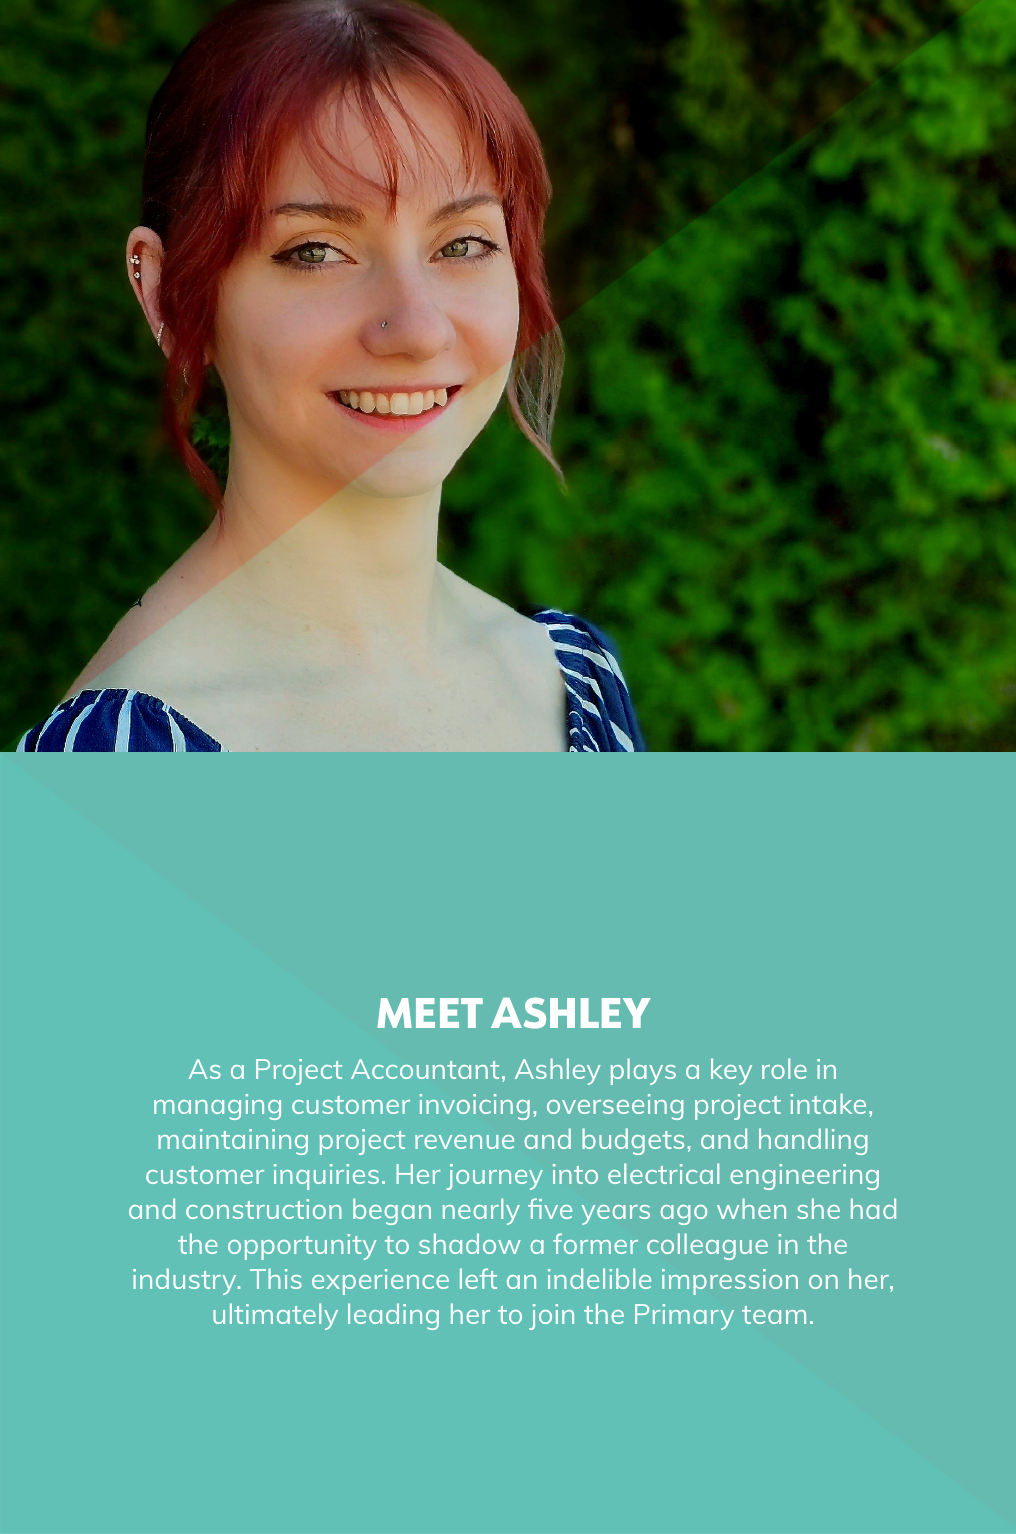 As a Project Accountant, Ashley plays a key role in managing customer invoicing, overseeing project intake, maintaining project revenue and budgets, and handling customer inquiries. Her journey into electrical engineering and construction began nearly five years ago when she had the opportunity to shadow a former colleague in the industry. This experience left an indelible impression on her, ultimately leading her to join the Primary team.